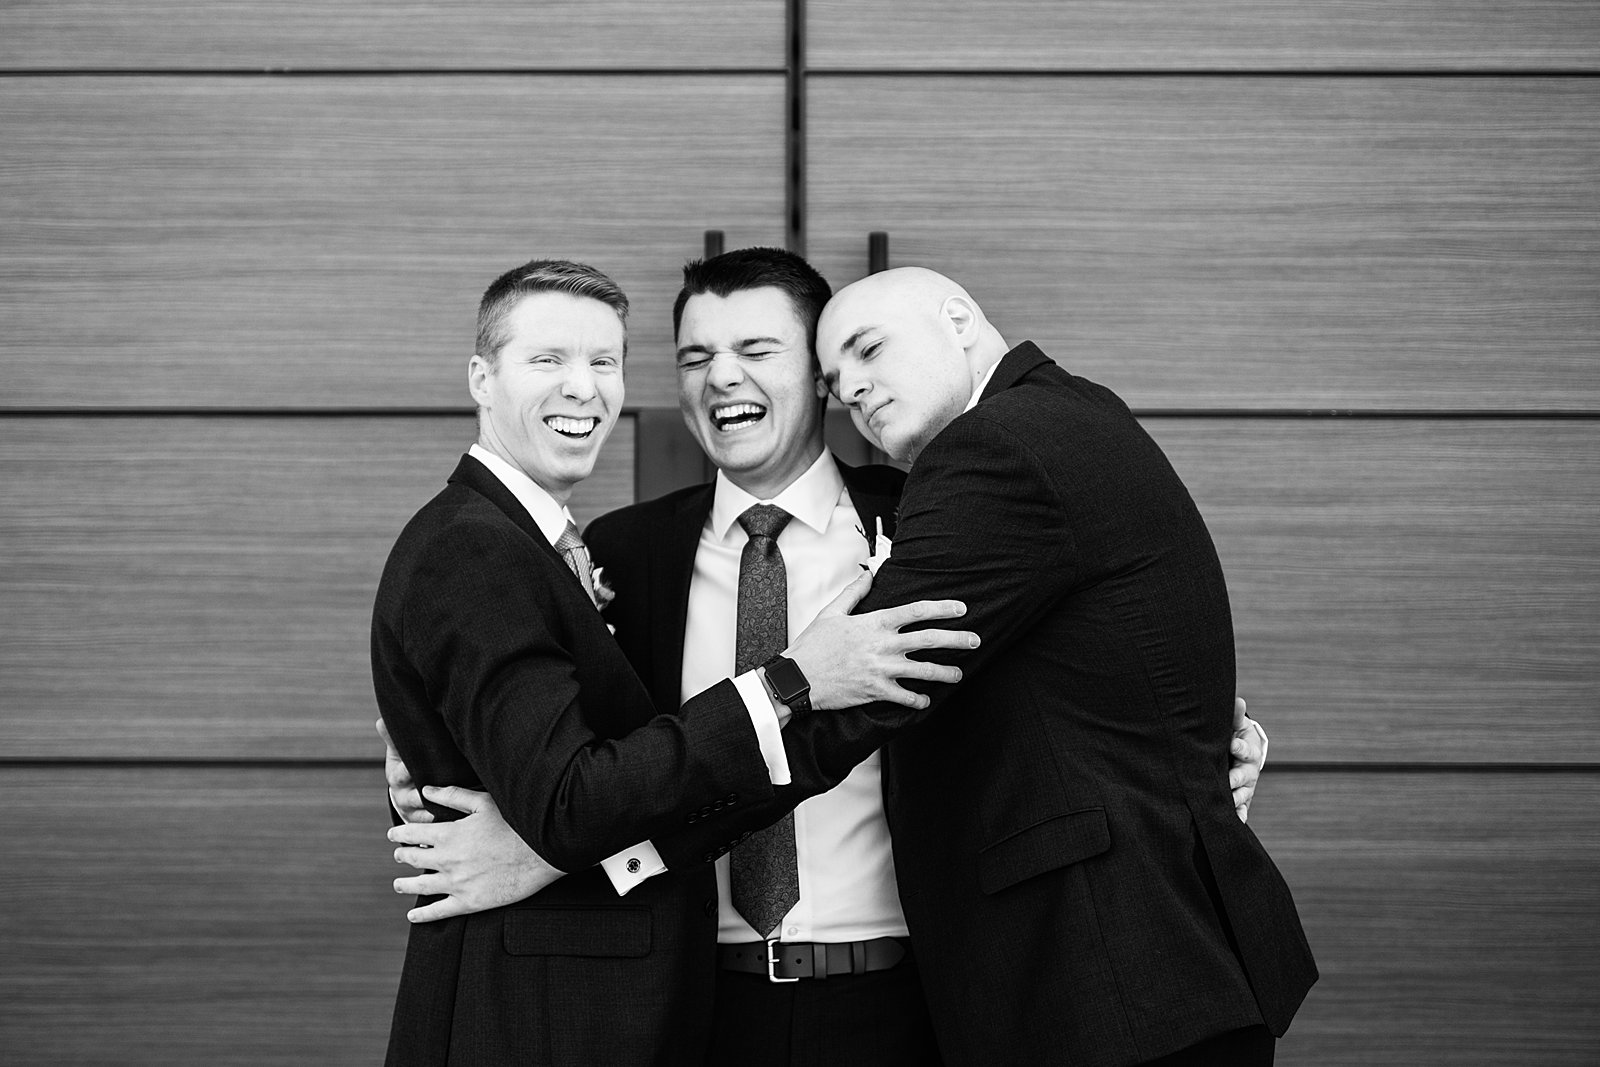 Groom and groomsmen laughing together at The Paseo wedding by Apache Junction wedding photographer PMA Photography.